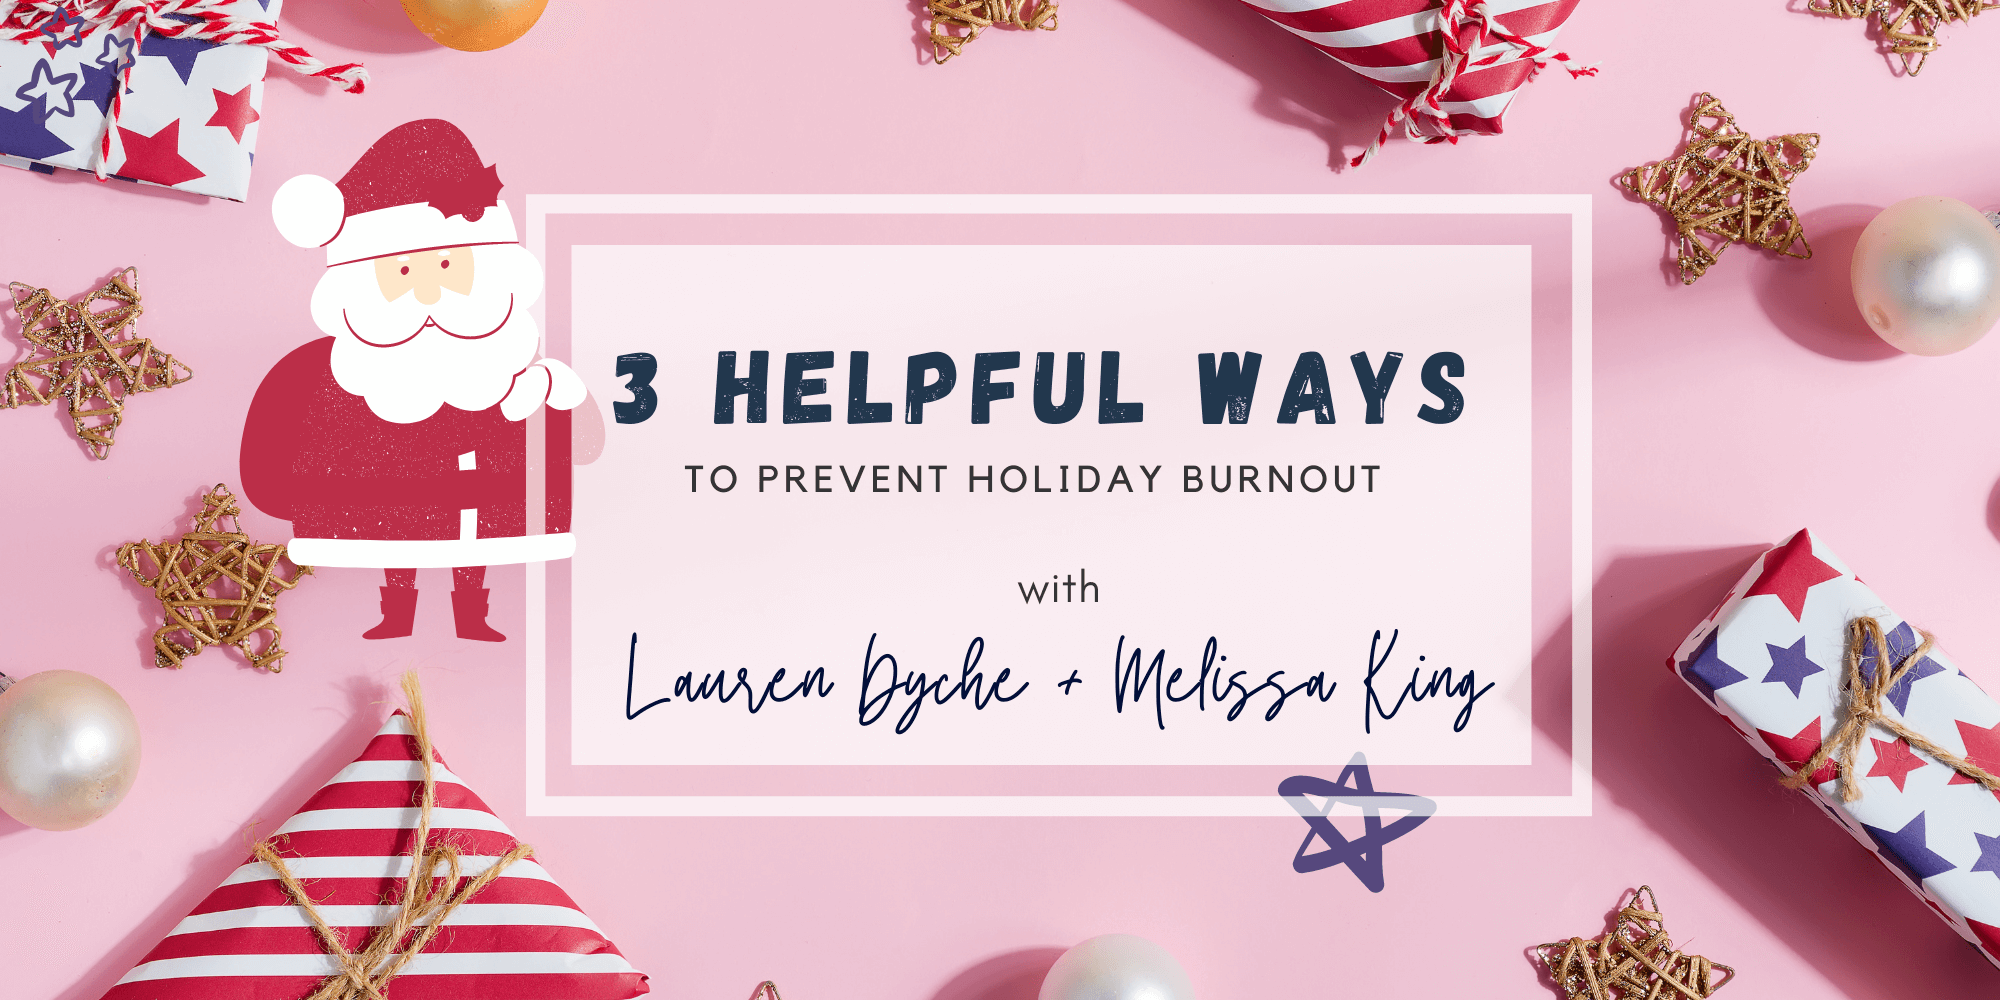 3 Helpful Ways to Prevent Holiday Burnout